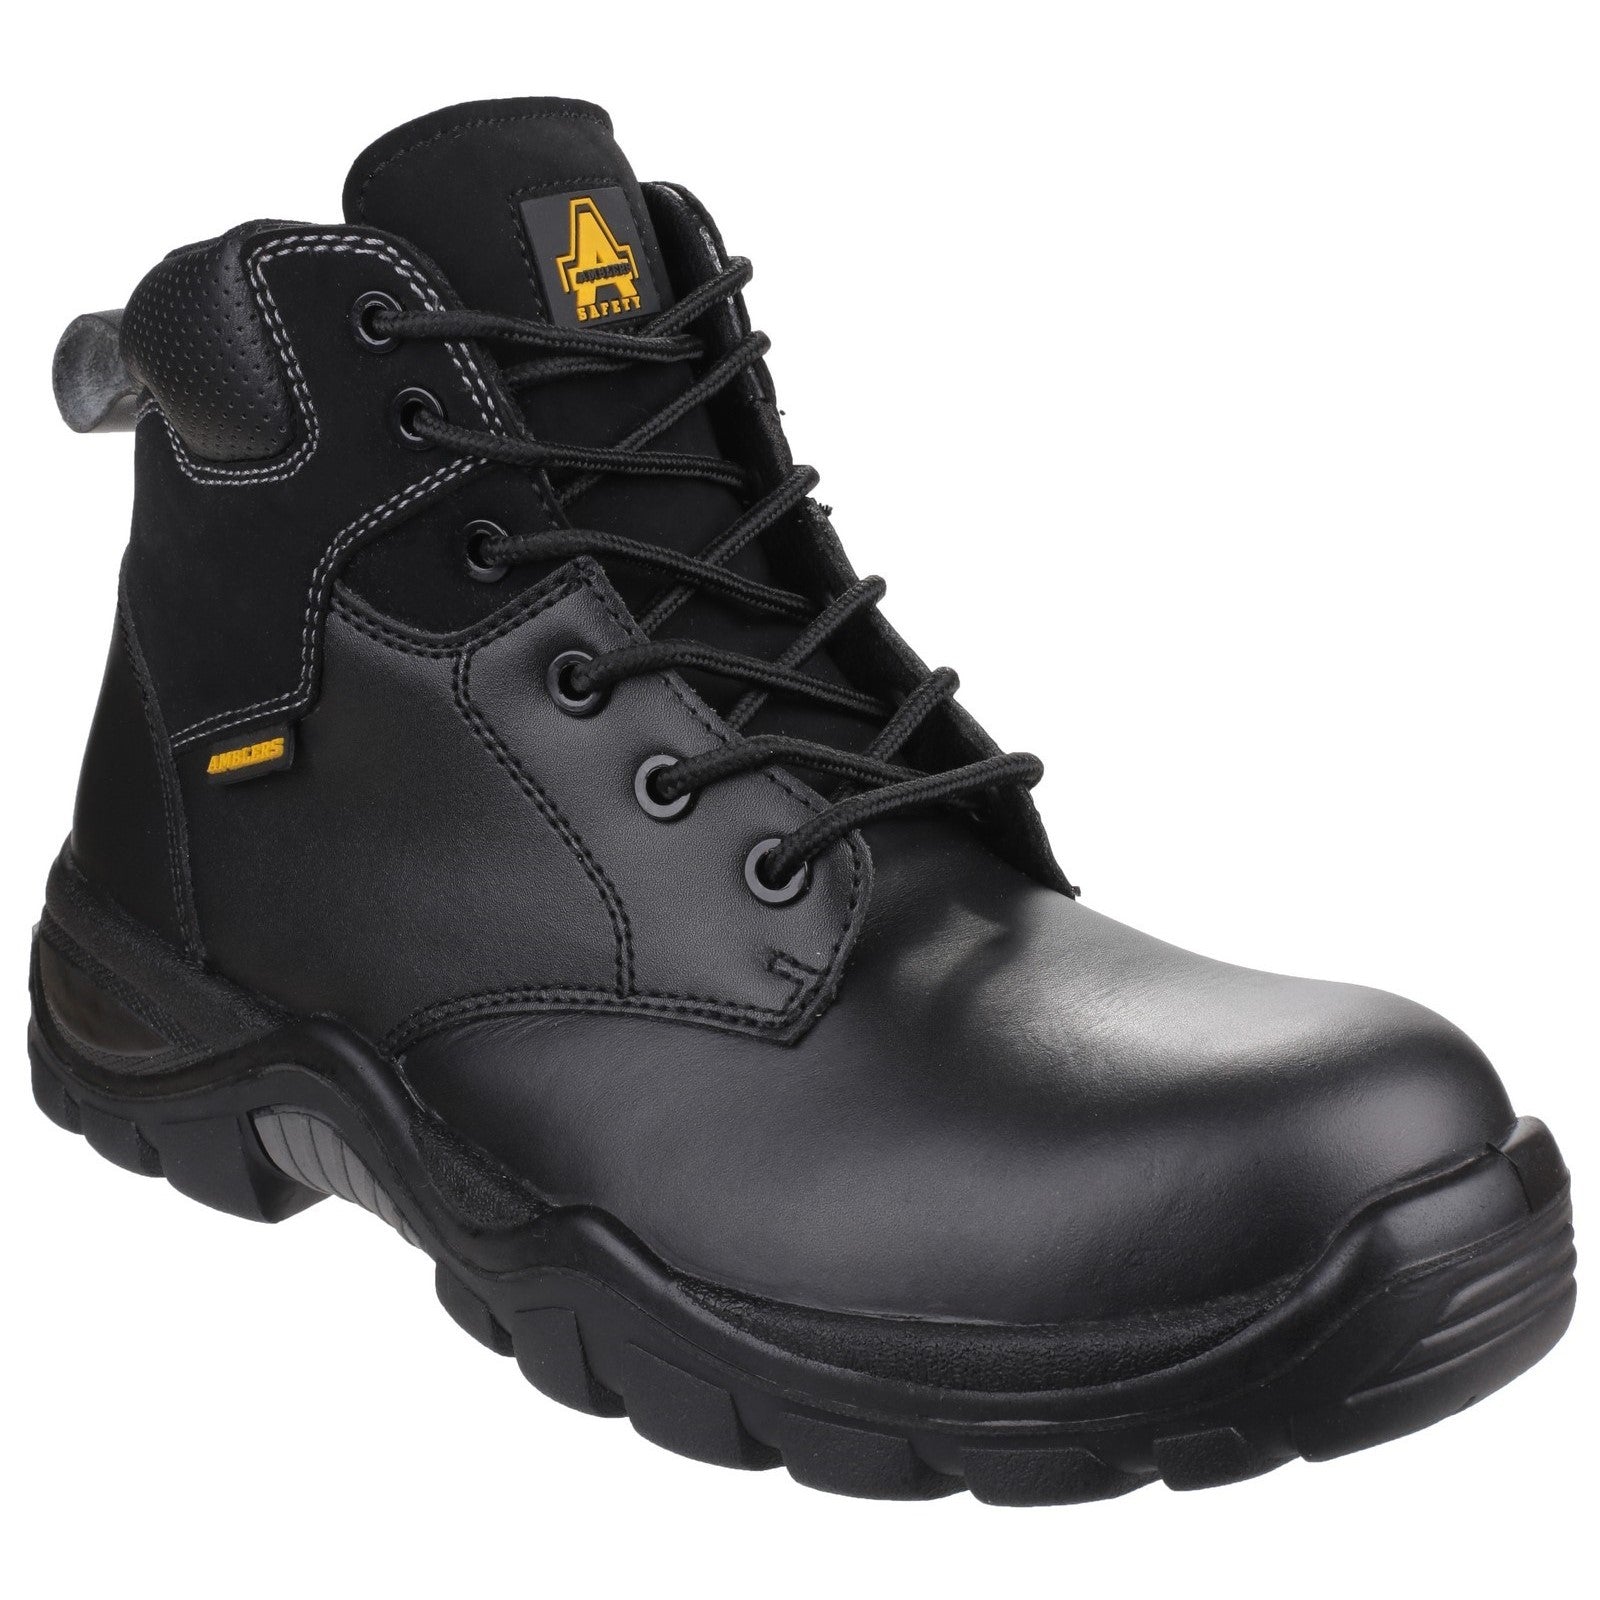 Amblers AS302C Preseli Non-Metal Lace up Safety Boot